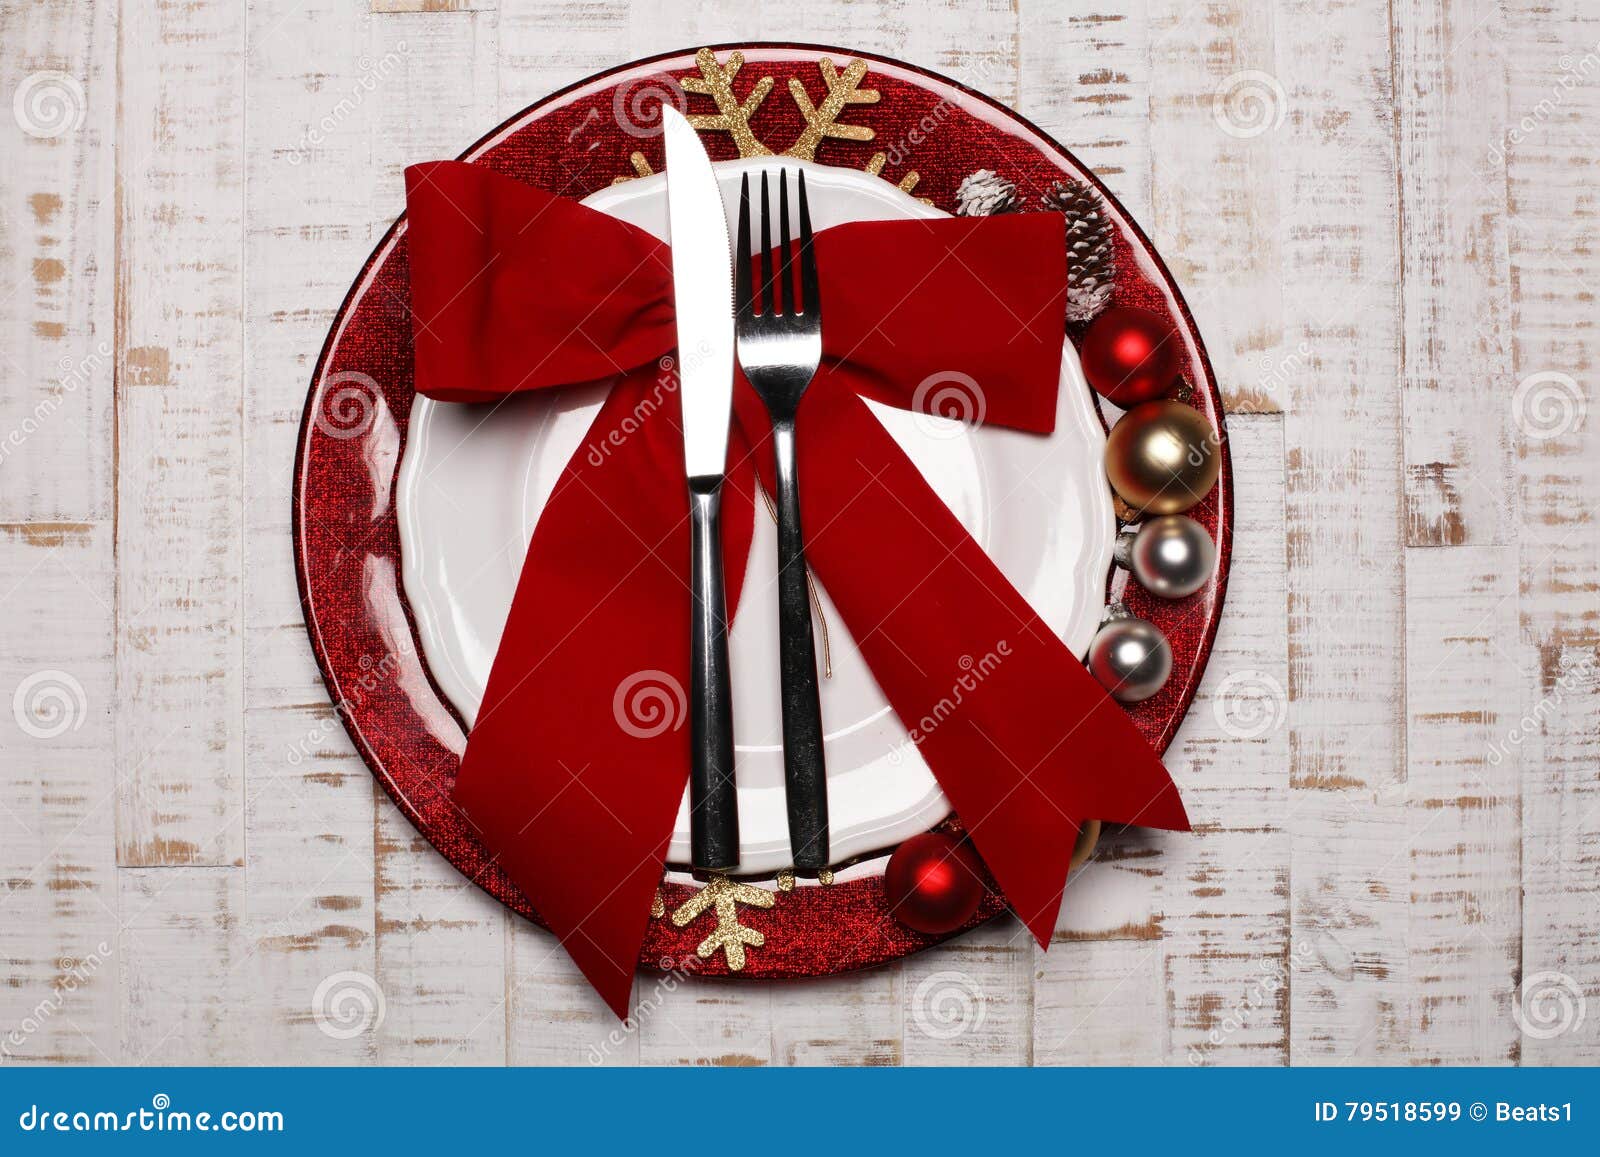 Plate on Rustic Wooden Background. Christmas Table Setting Concept ...